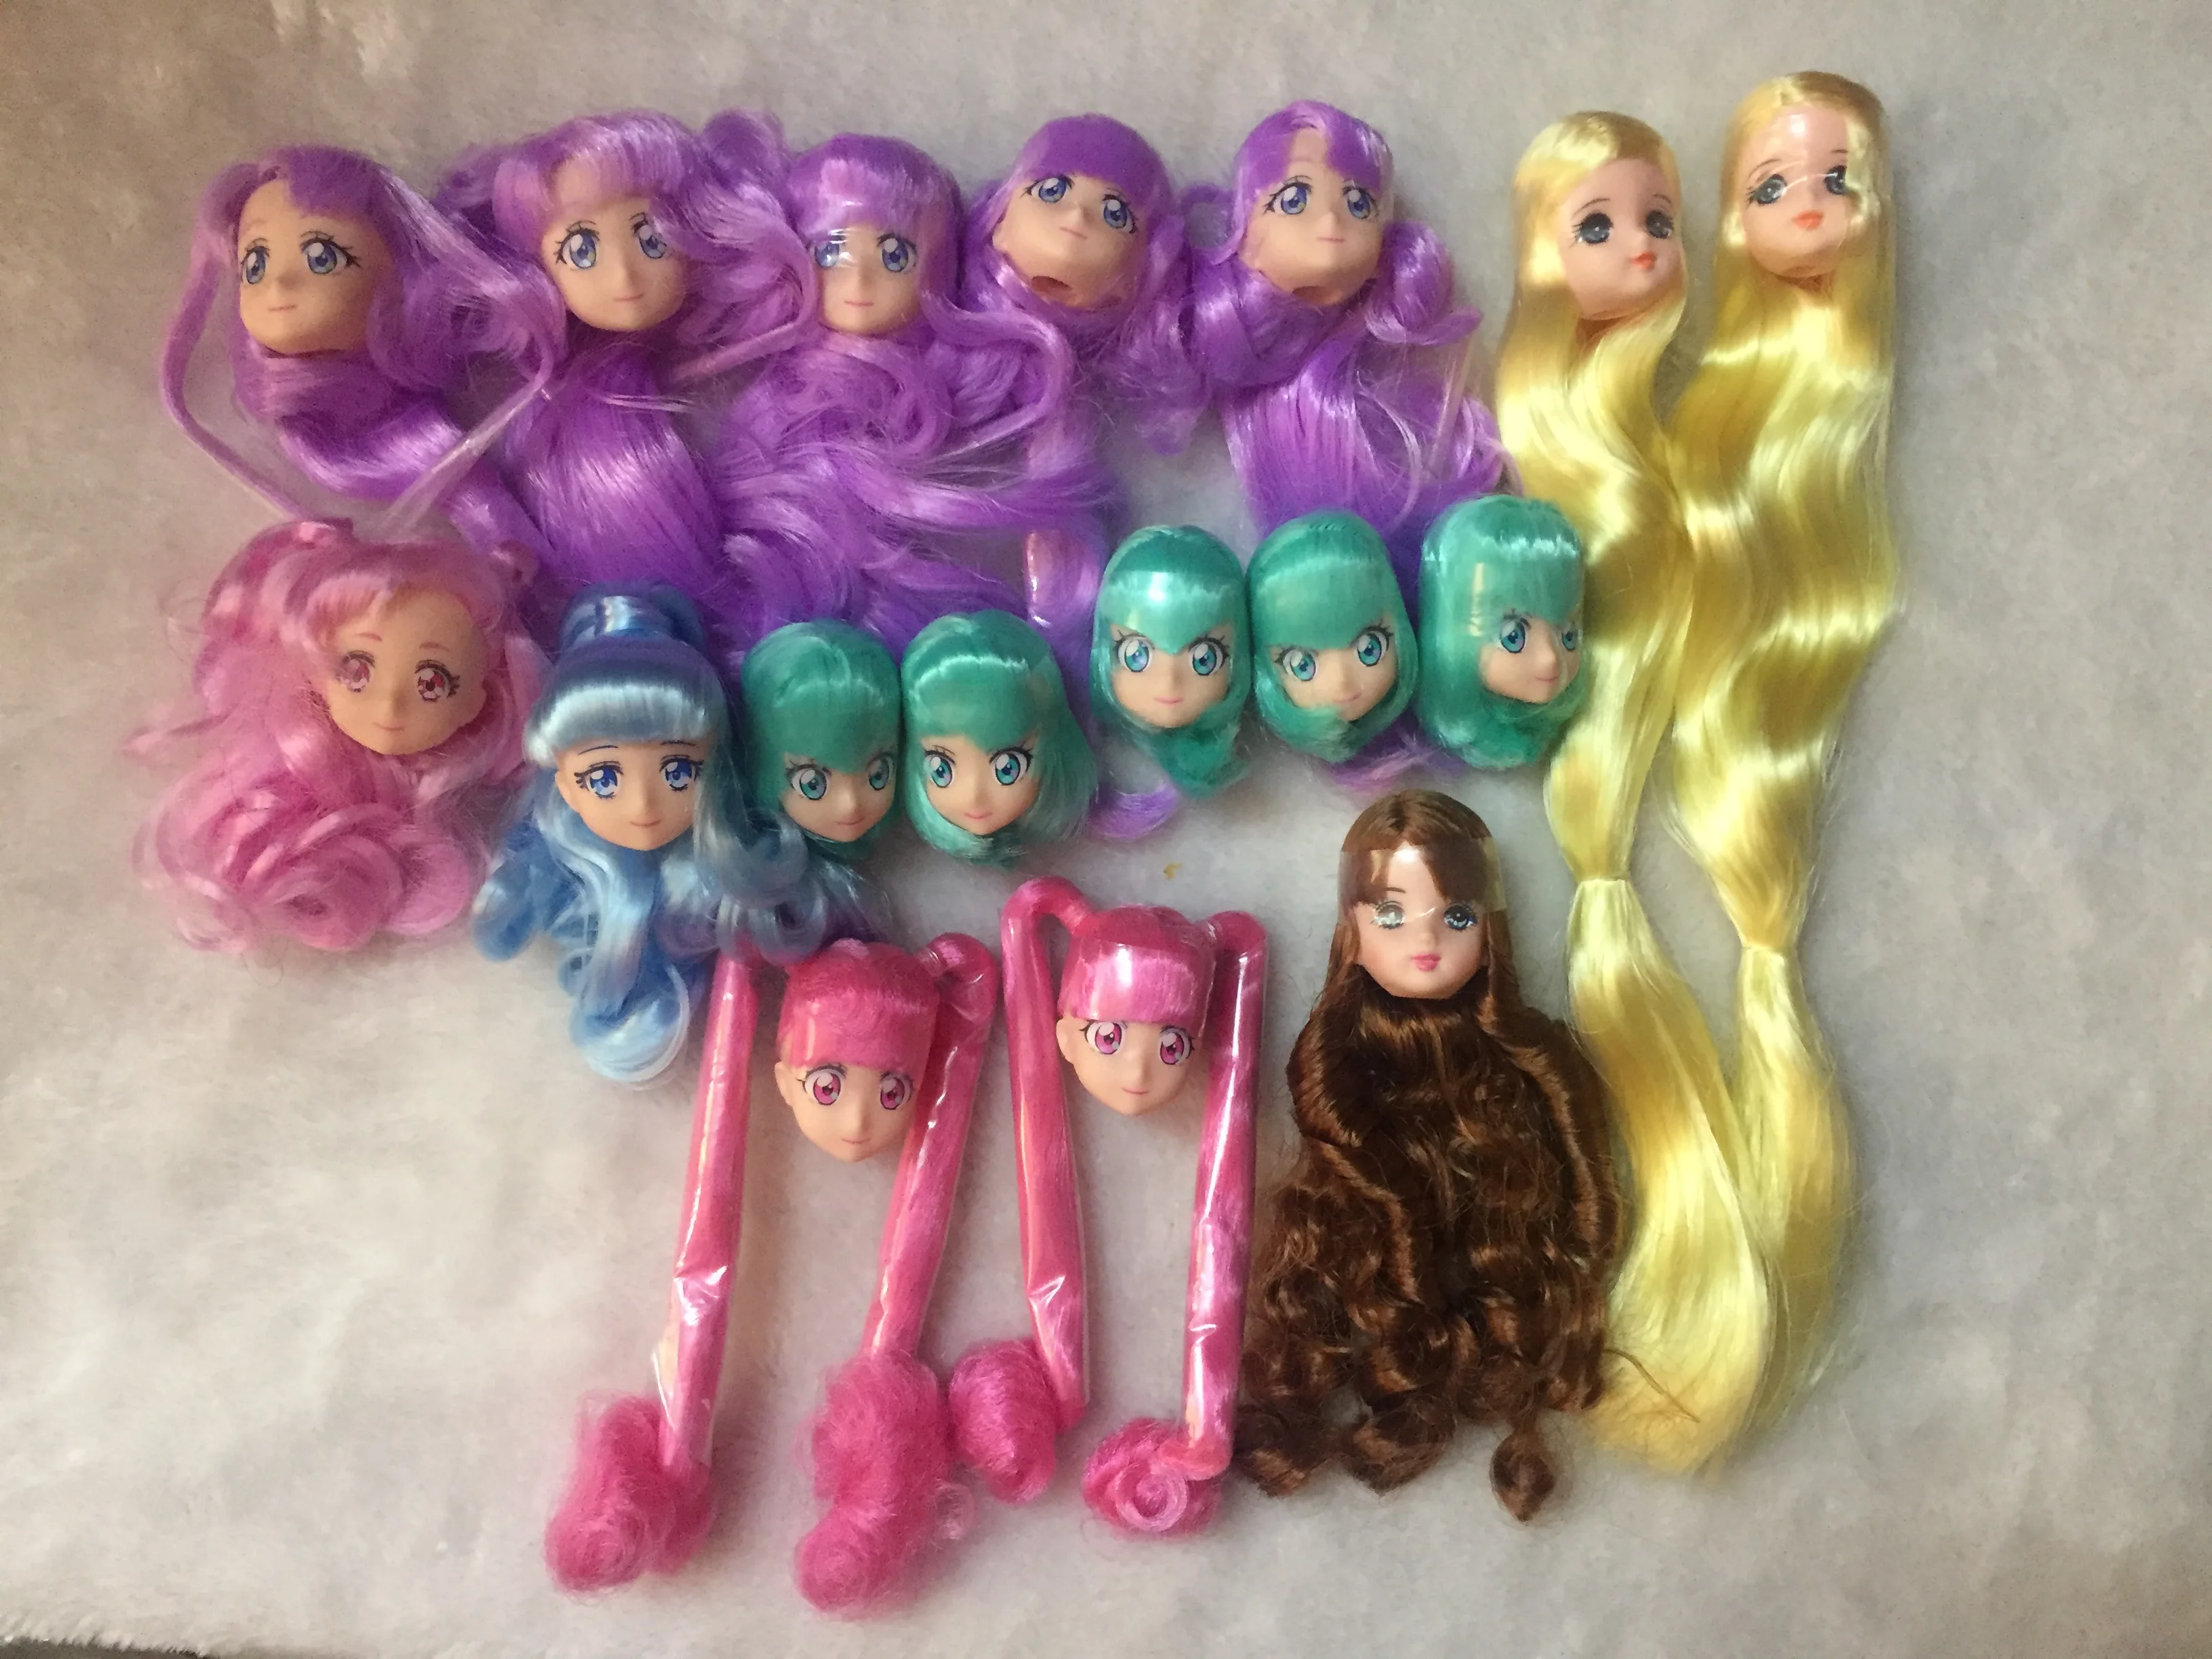 Long Hair Licca Doll Heads Short Long Curve Hair Soft Gold Black Yellow Hair Doll Heads Boy Girl Doll Parts DIY Accessories Toy long battery life brush electric scrubber set with 5 brush heads for cordless brush for bathroom shower bathtub glass car